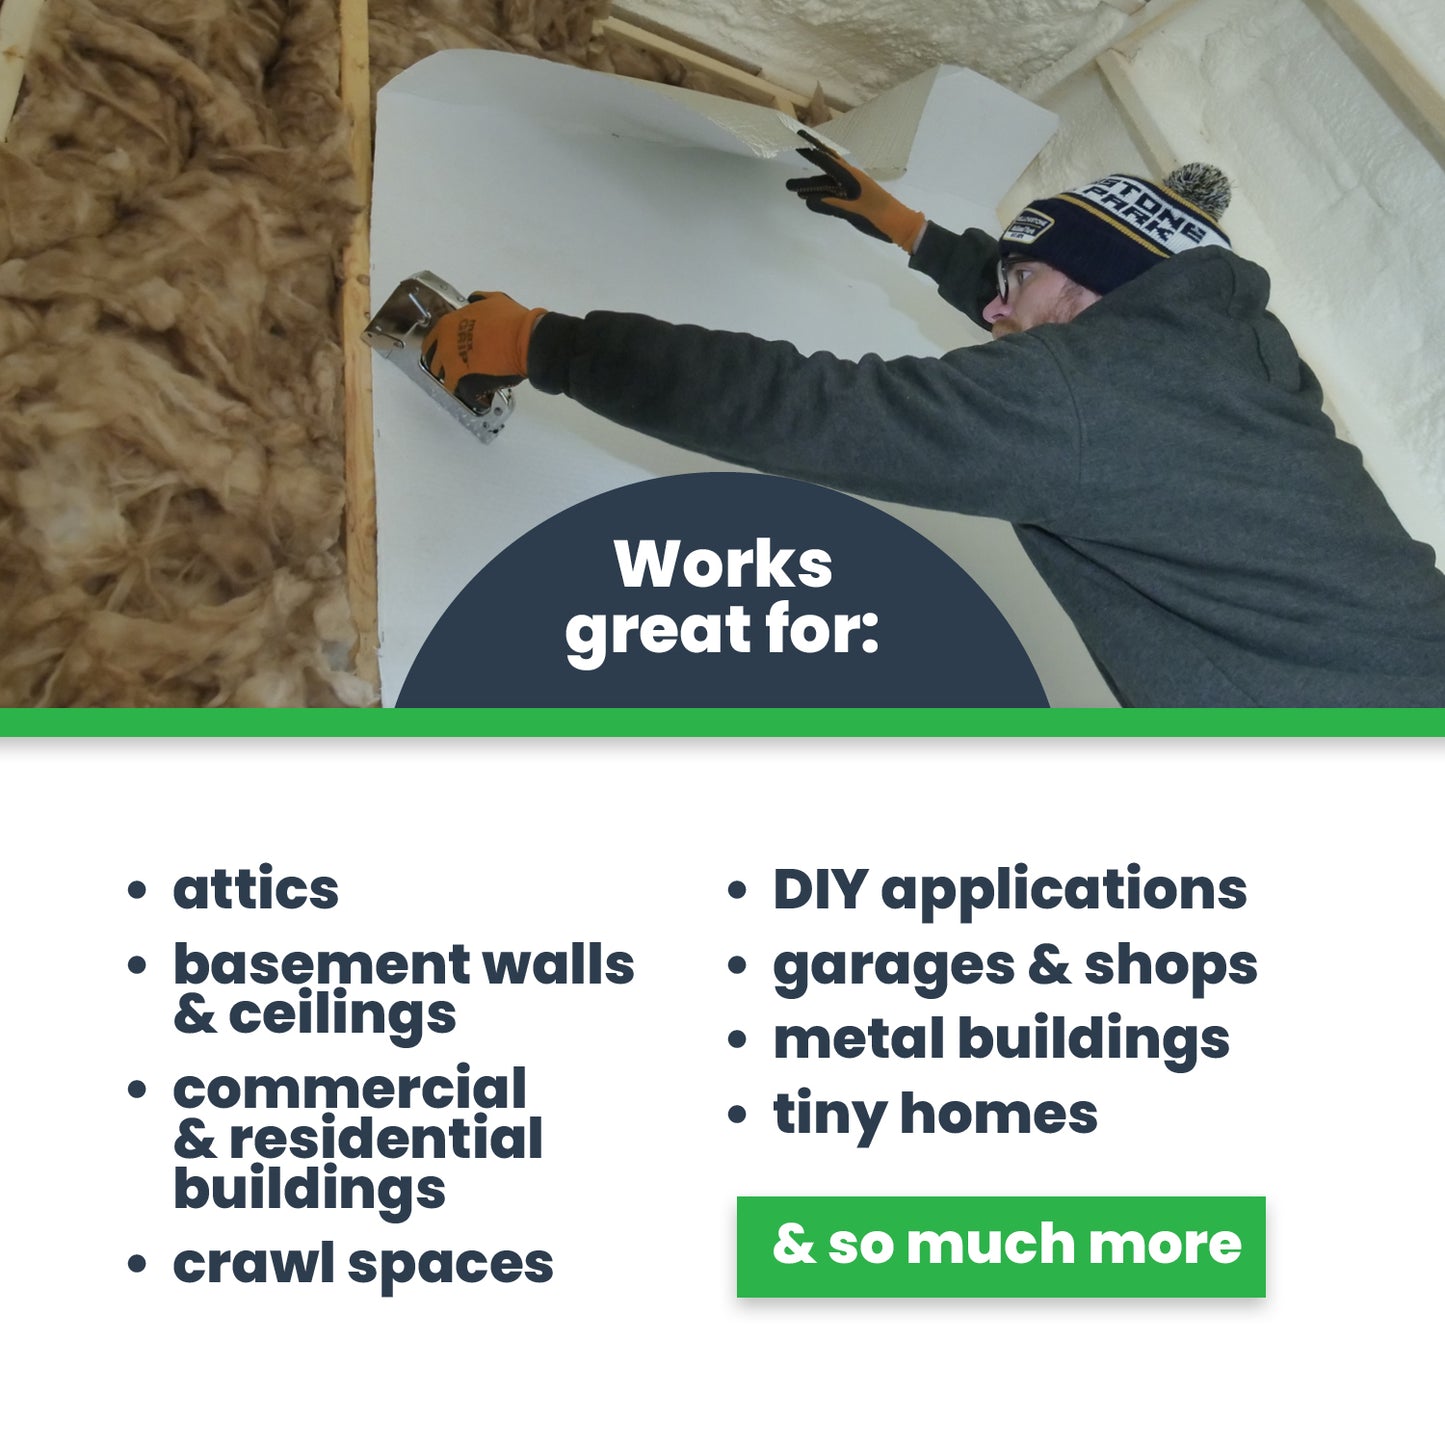 double bubble insulation for attics, basements, commercial and residential buildings, crawl spaces, garages, metal buildings, tiny homes, more